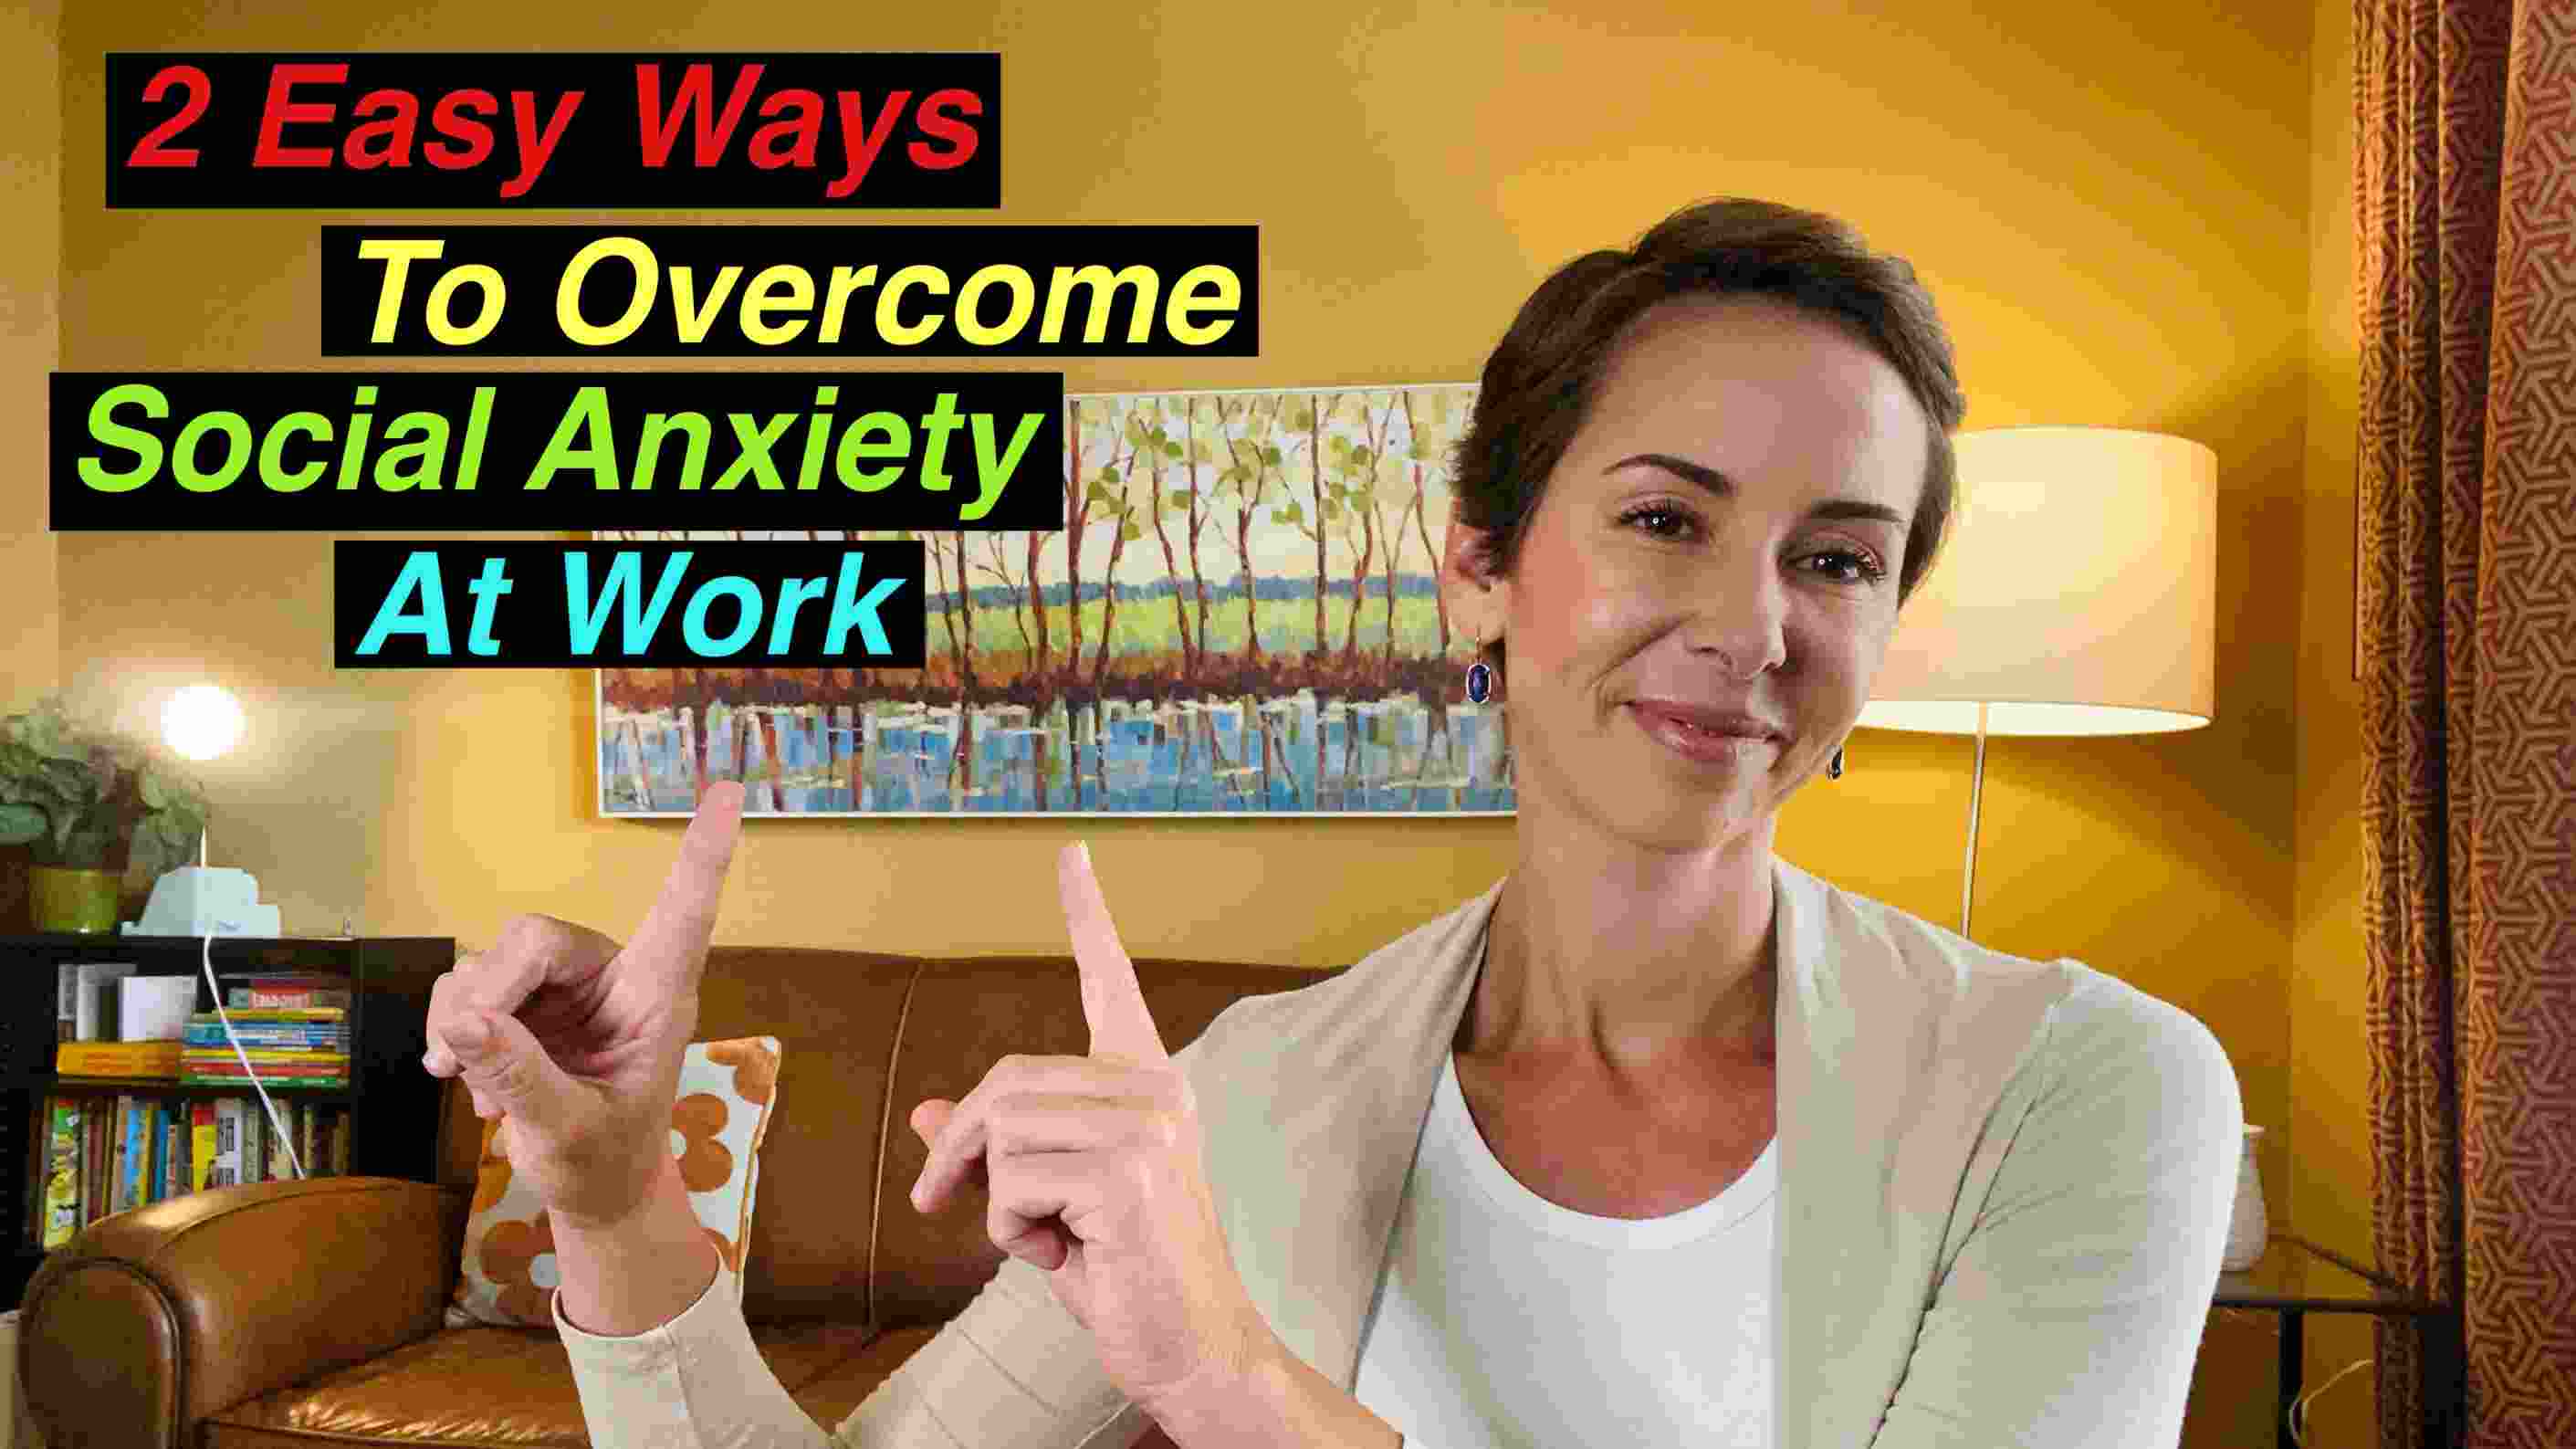 
Jourdan Travers, LCSW discusses how to overcome anxiety at work
